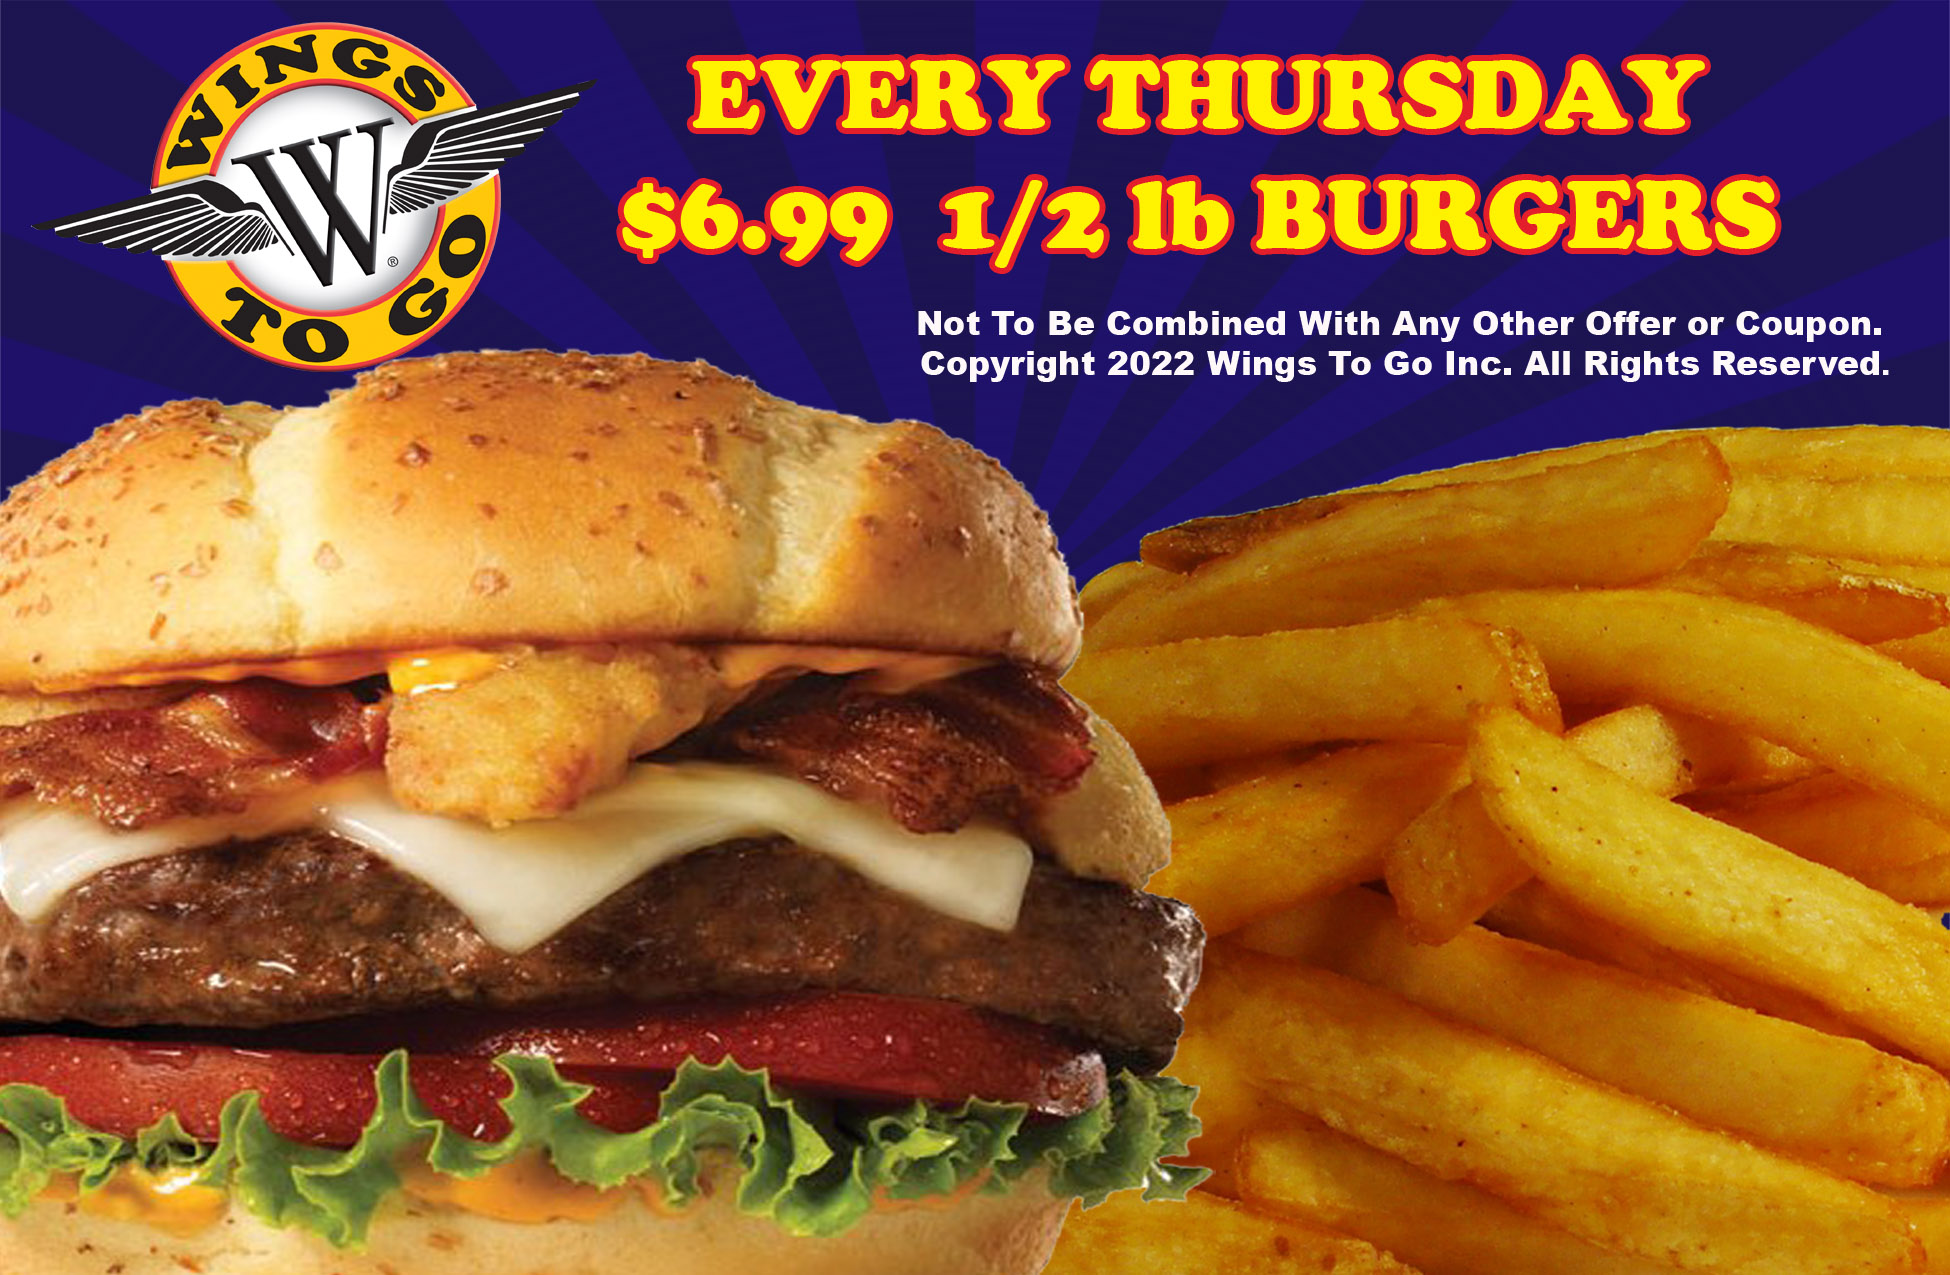 Burger and fries with thursday $6.99 burgers